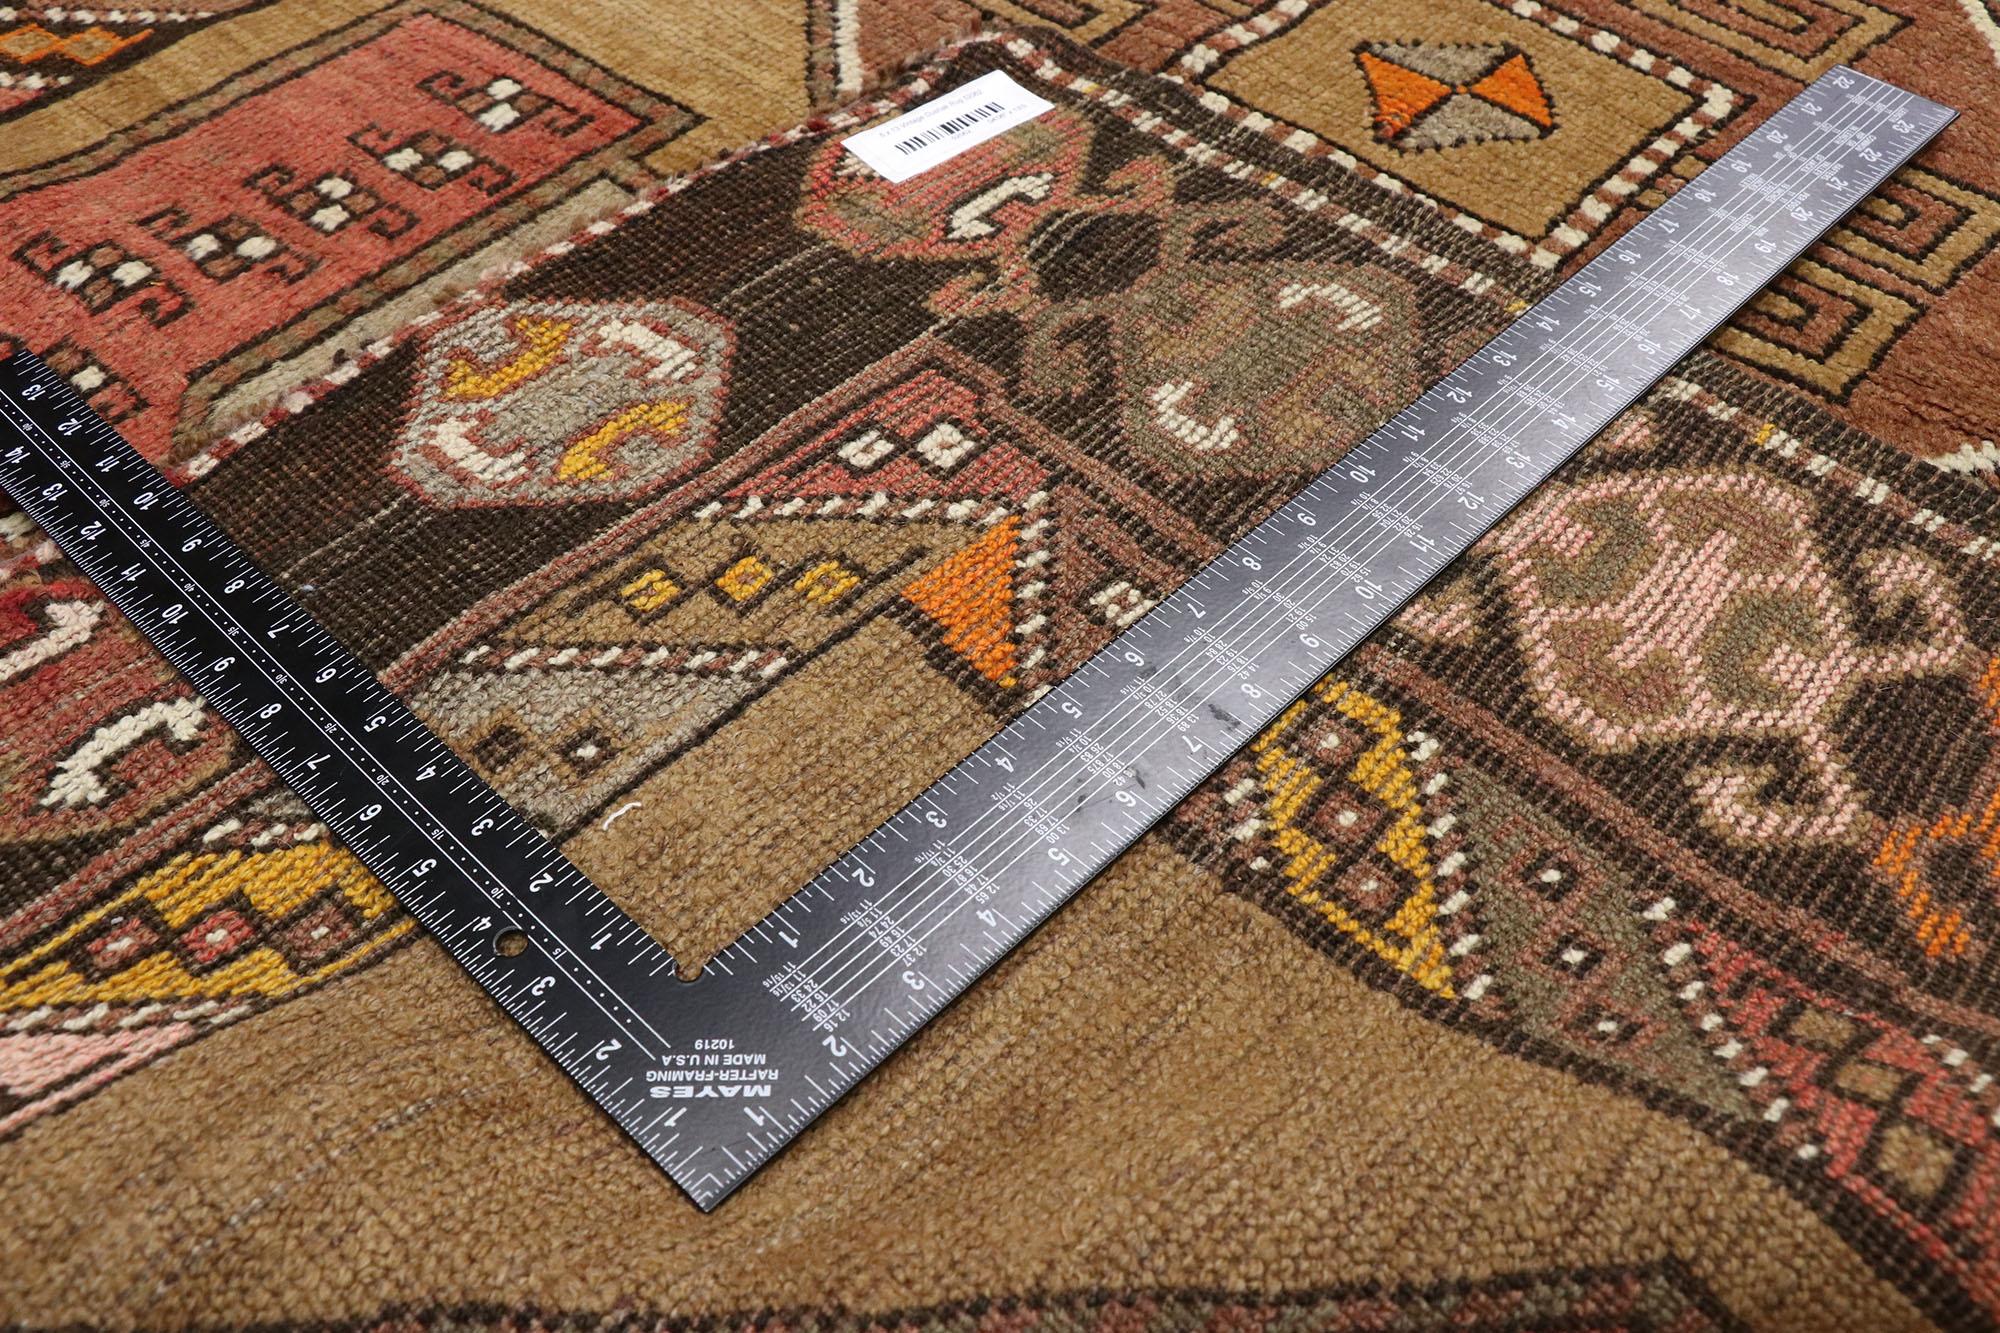 52062 Vintage Turkish Oushak Runner, 04'06 x 13'00. Warm and inviting with incredible detail and texture, this hand knotted vintage Turkish Oushak runner is a captivating vision of woven beauty. The eye-catching tribal elements and earthy colorway